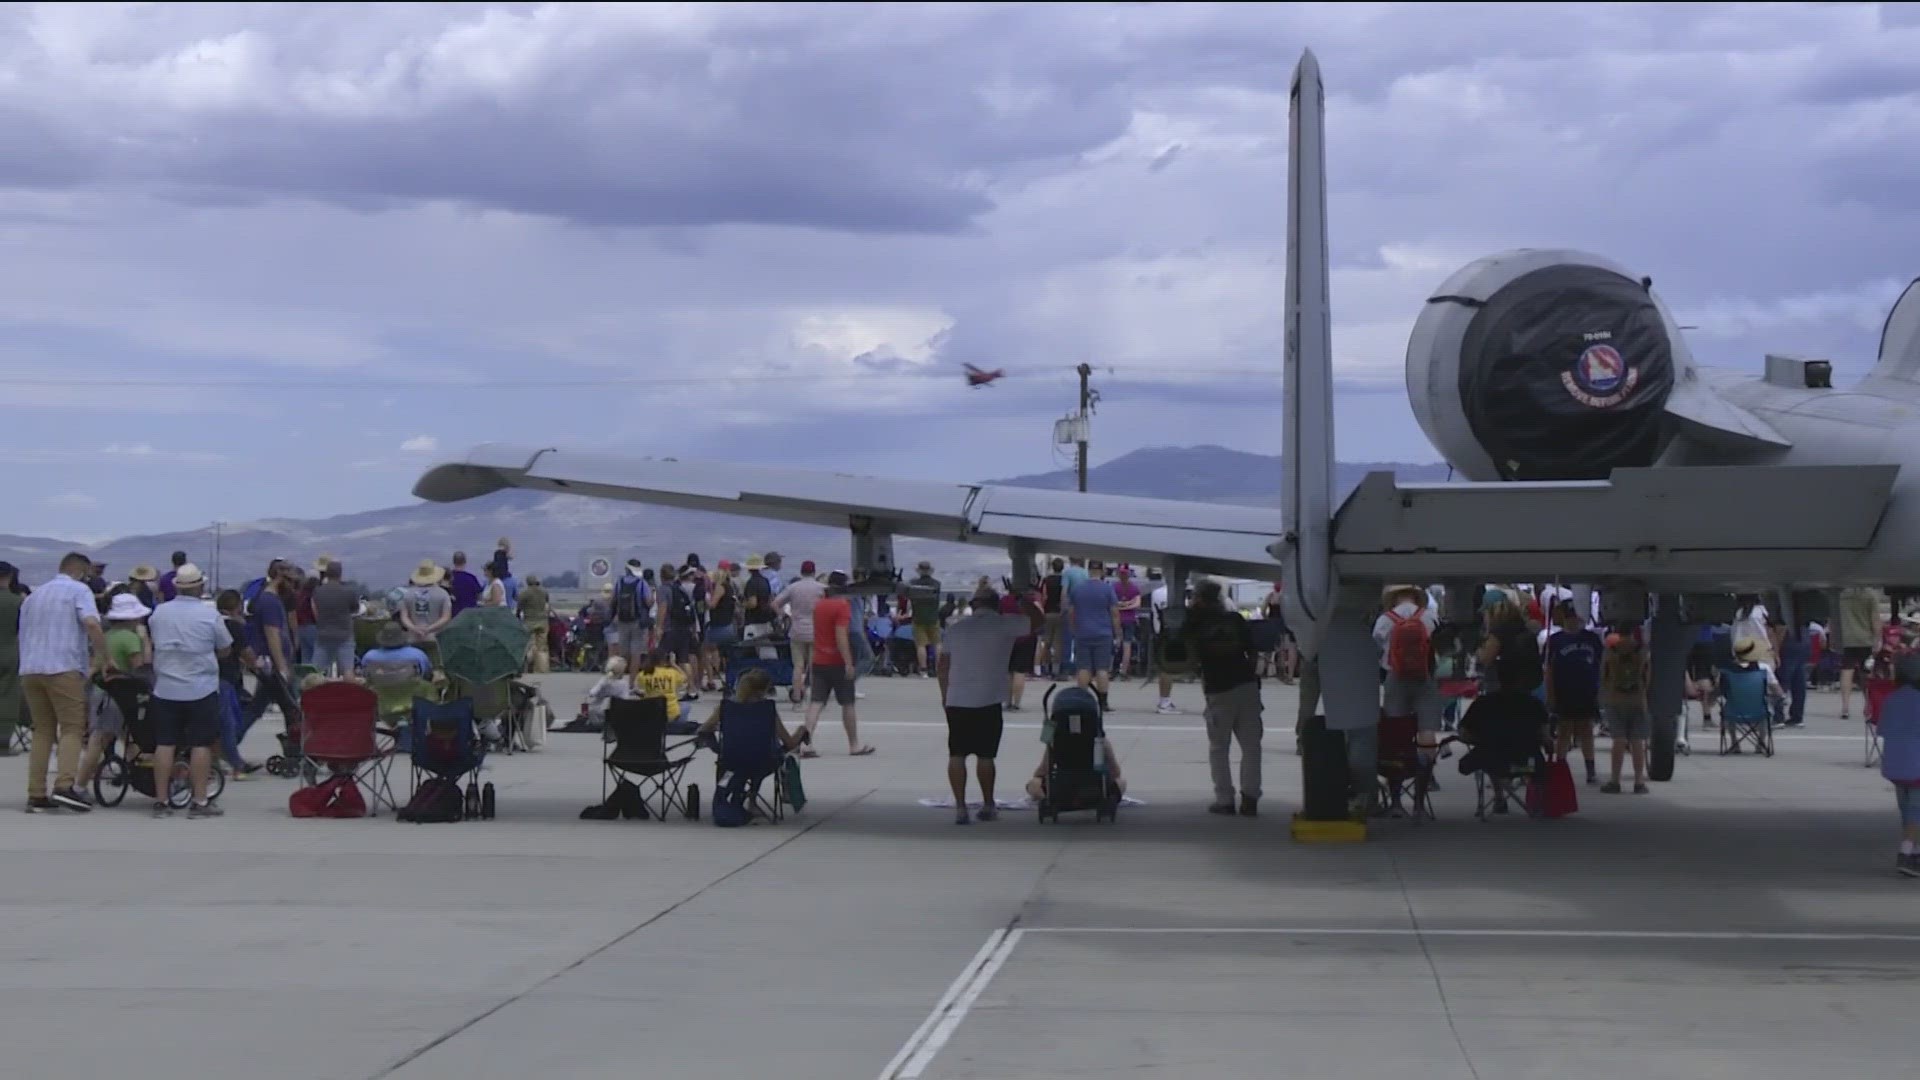 Between the Gowen Thunder Airshow, Albertsons Boise Open, and Western Idaho Fair - it was a busy week in Boise.